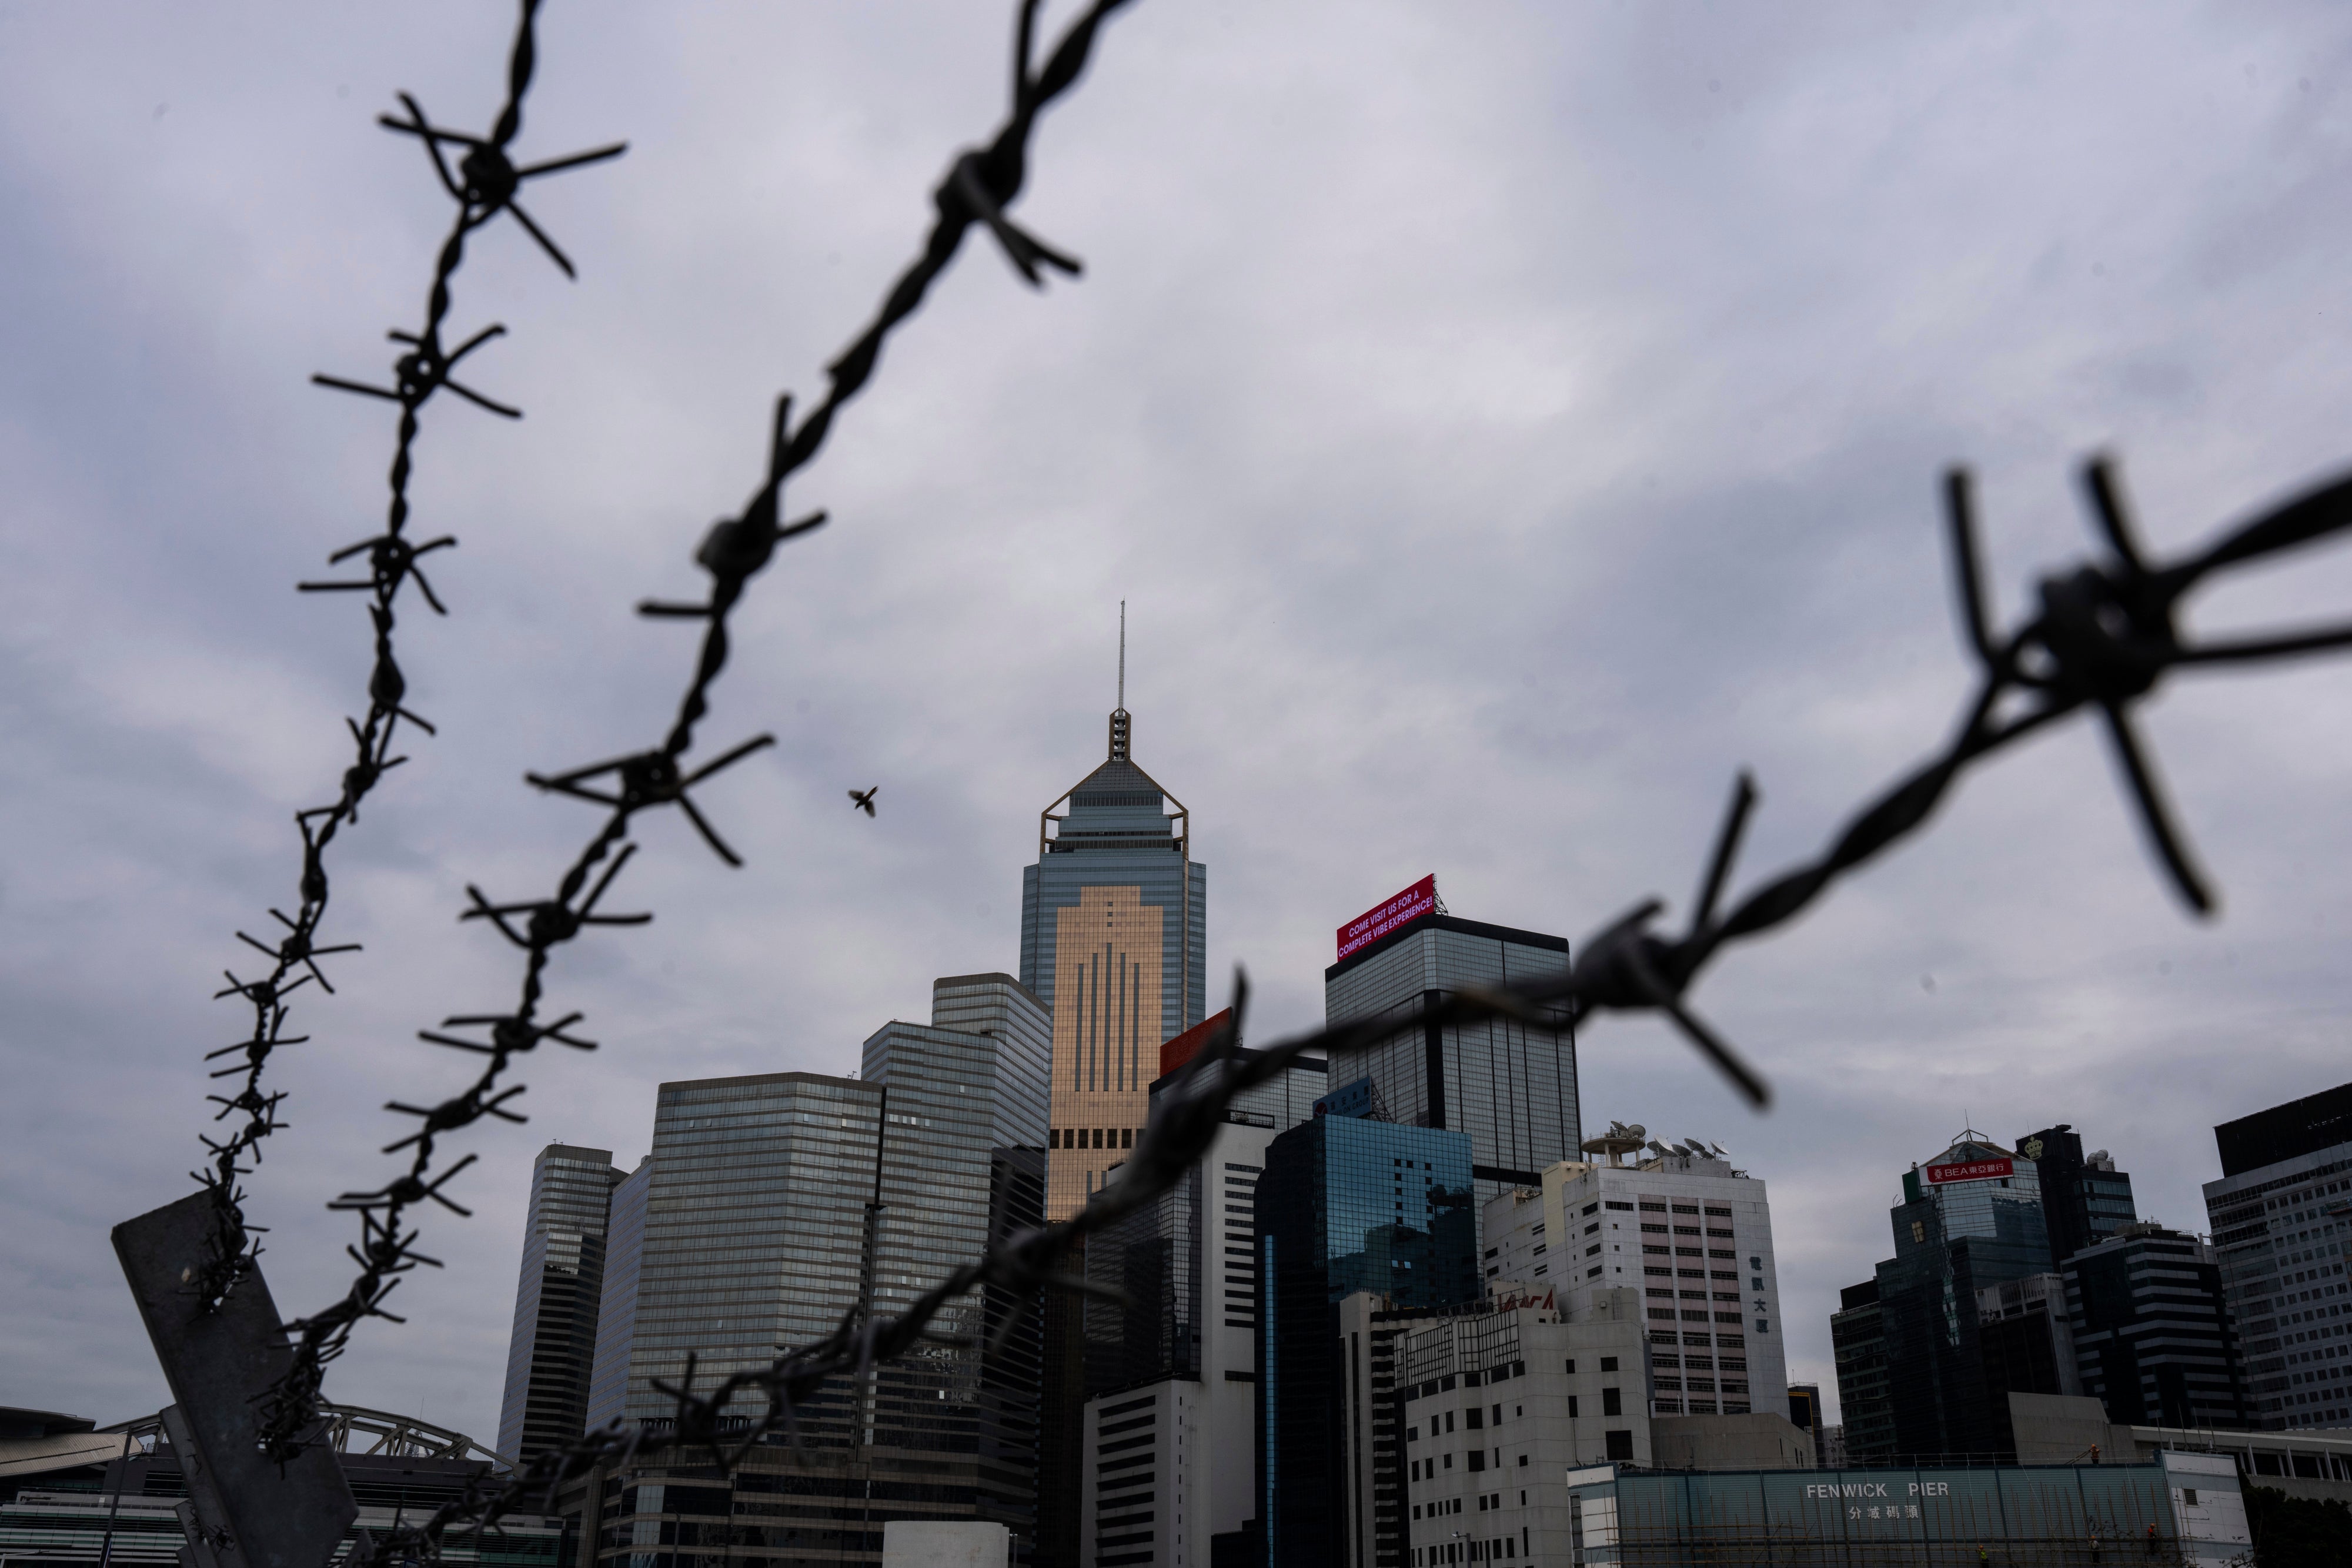 The law builds on another imposed on Hong Kong by Beijing four years ago